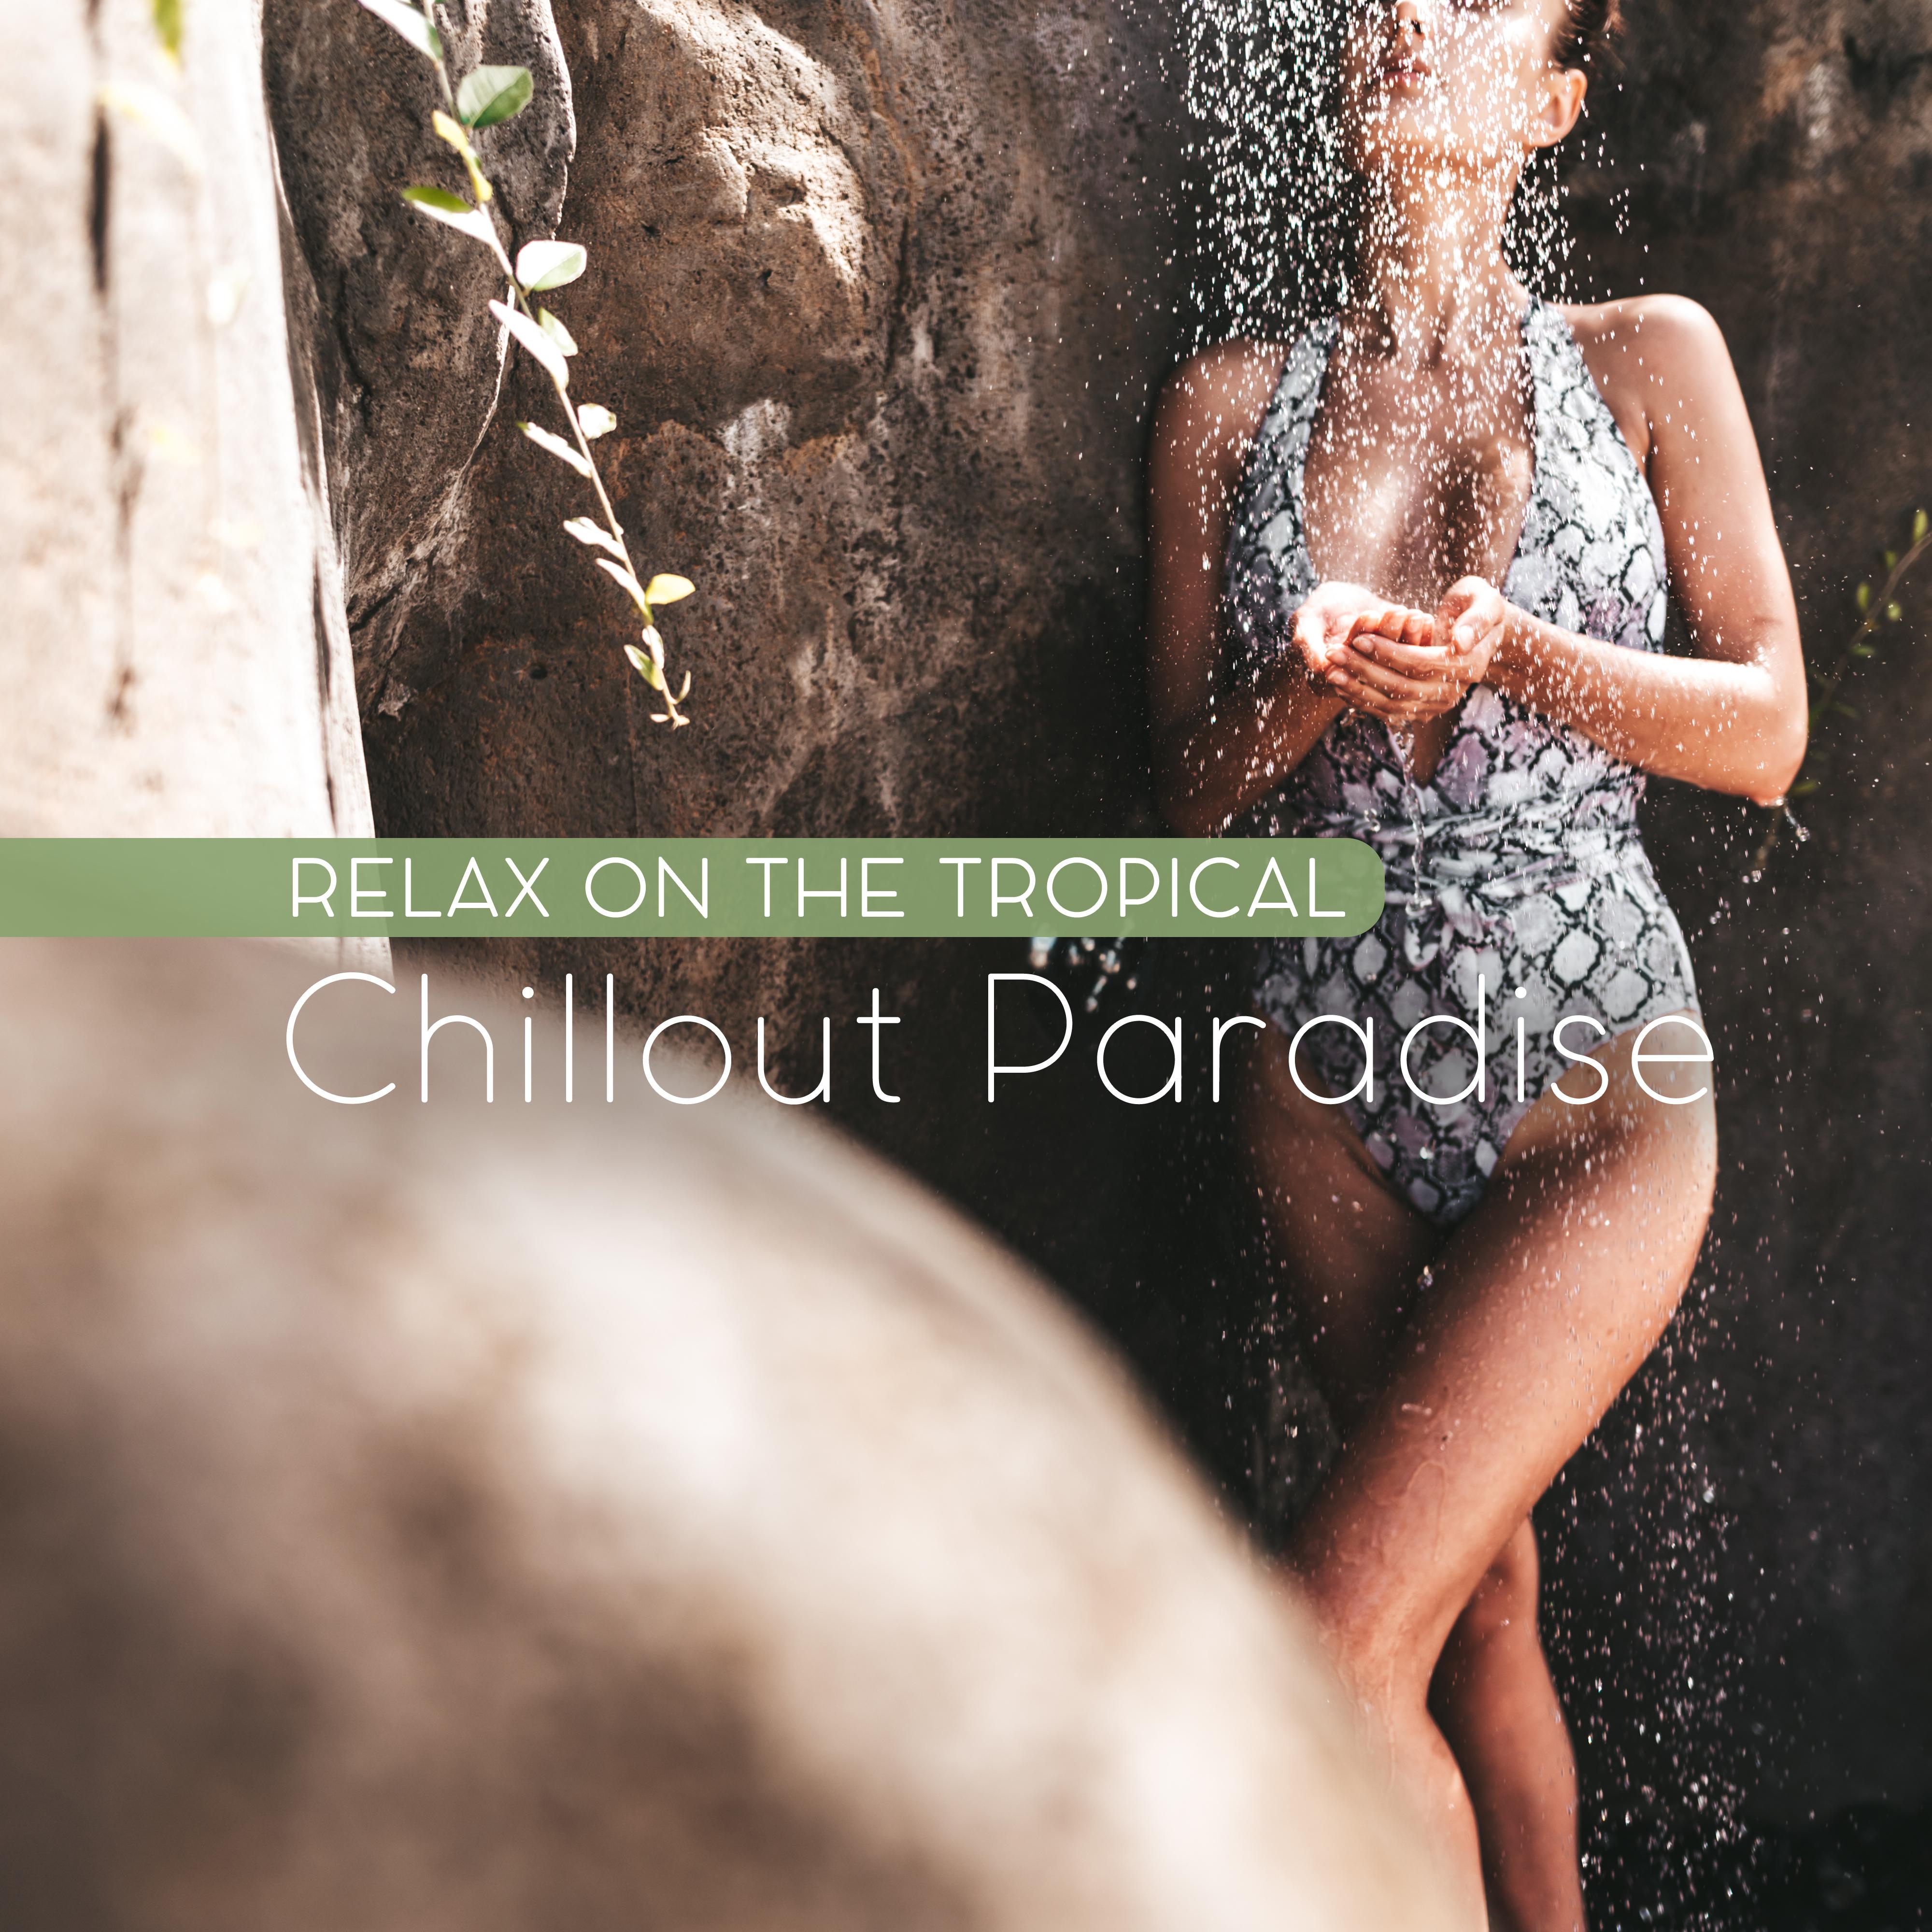 Relax on the Tropical Chillout Paradise: Chill Out Music Compilation of Best 2019 Hits, Perfect Vacation Misx, Balearic Rhythms, Beach Beautiful Vibes